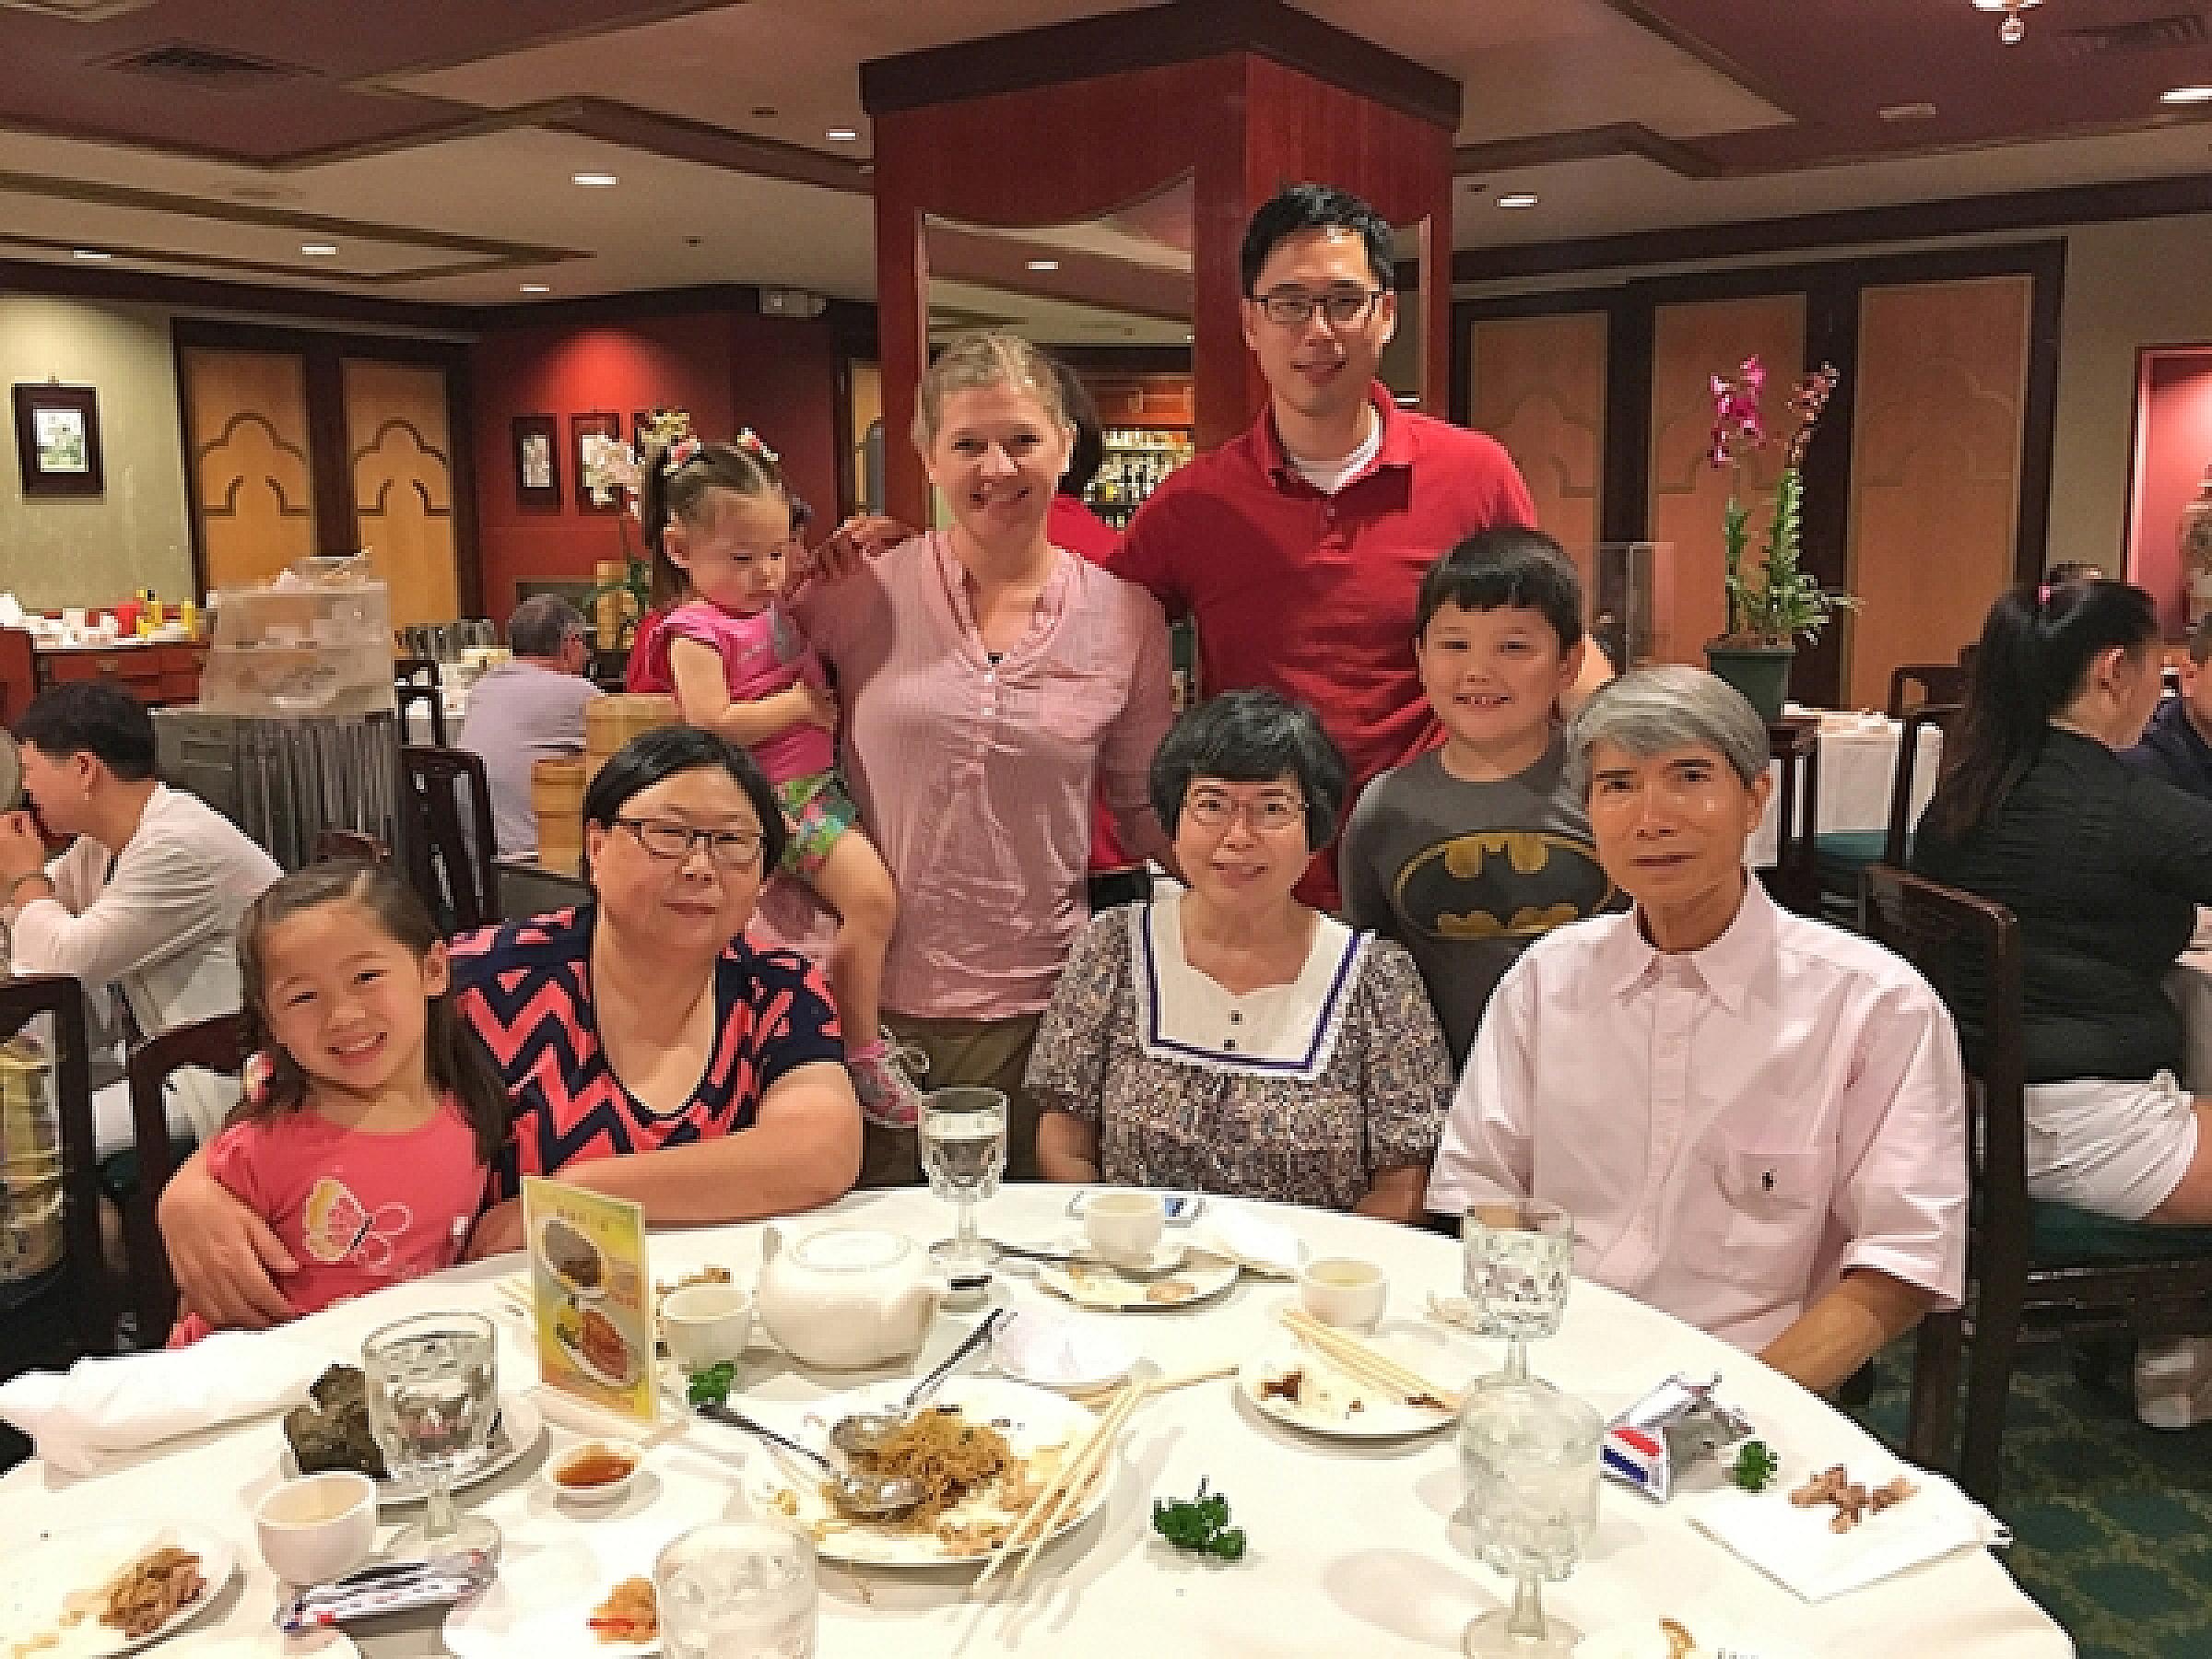 Alvin Kwok, MD, MPH with his family at a restaurant